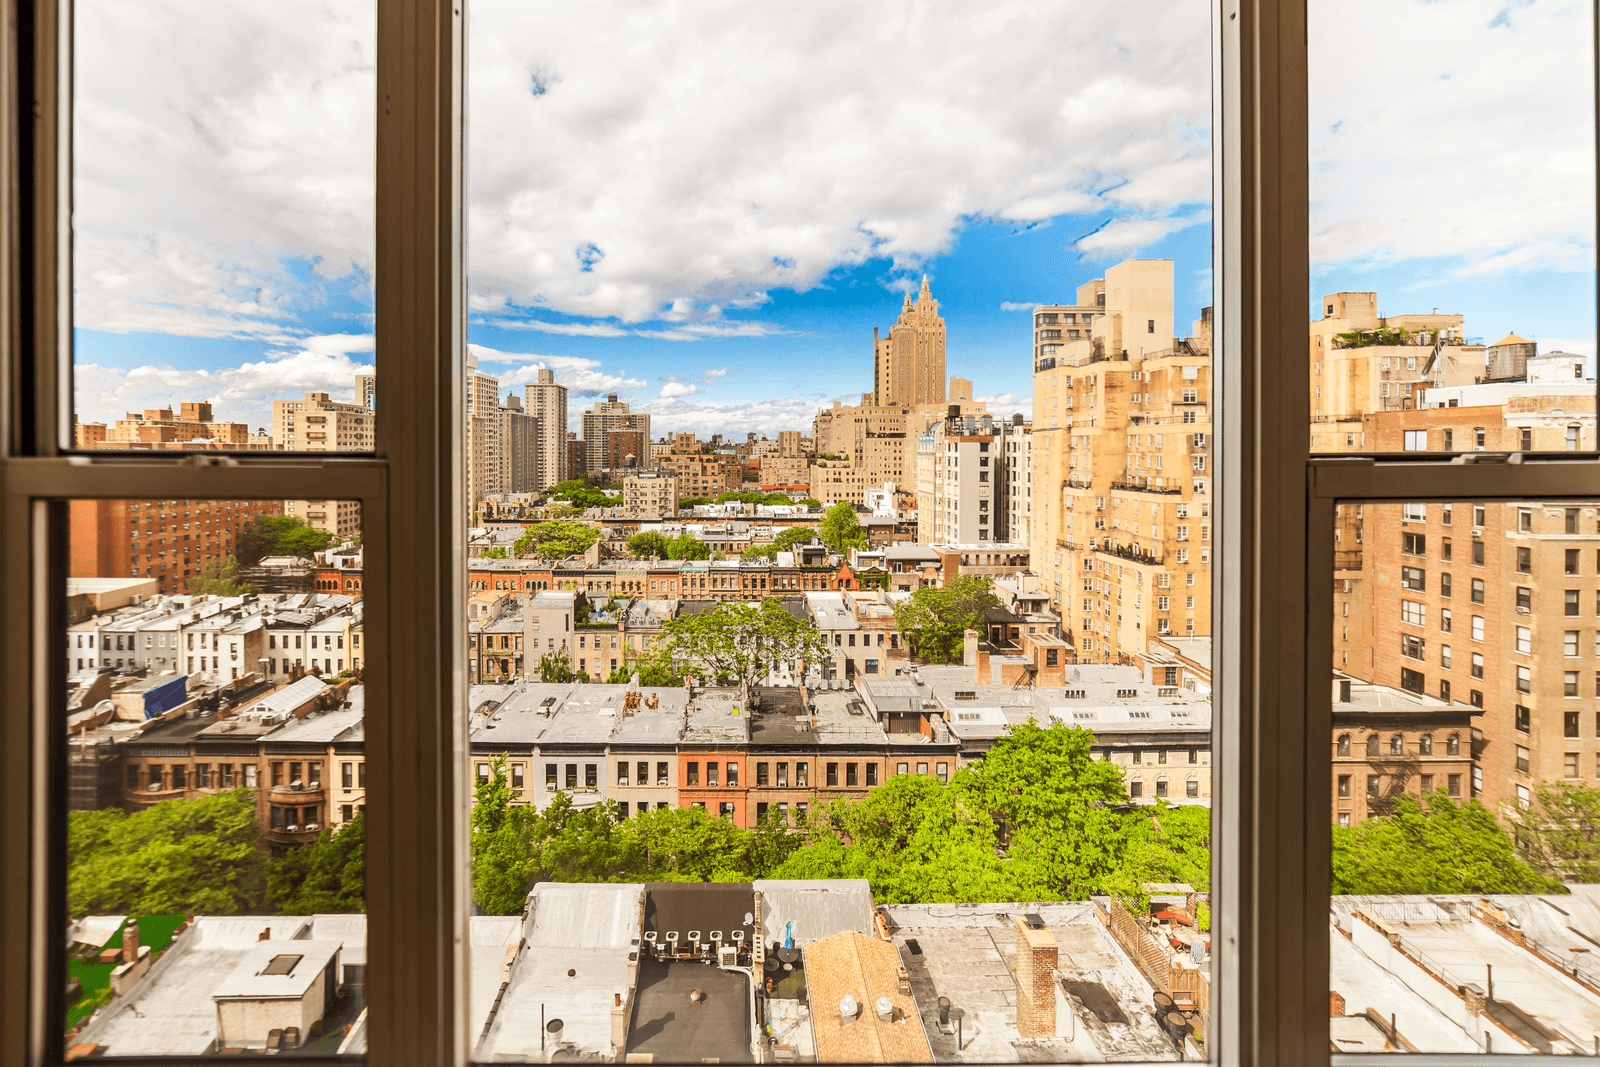 Price Drop ! UWS  3BR/3.5Bths  by Central Park Superb Renovation,  Bright Quiet Hi-Floor. Open Views, White Glove Service, Gym, Amazing Roofdeck, Children's Playroom and Pet Spa